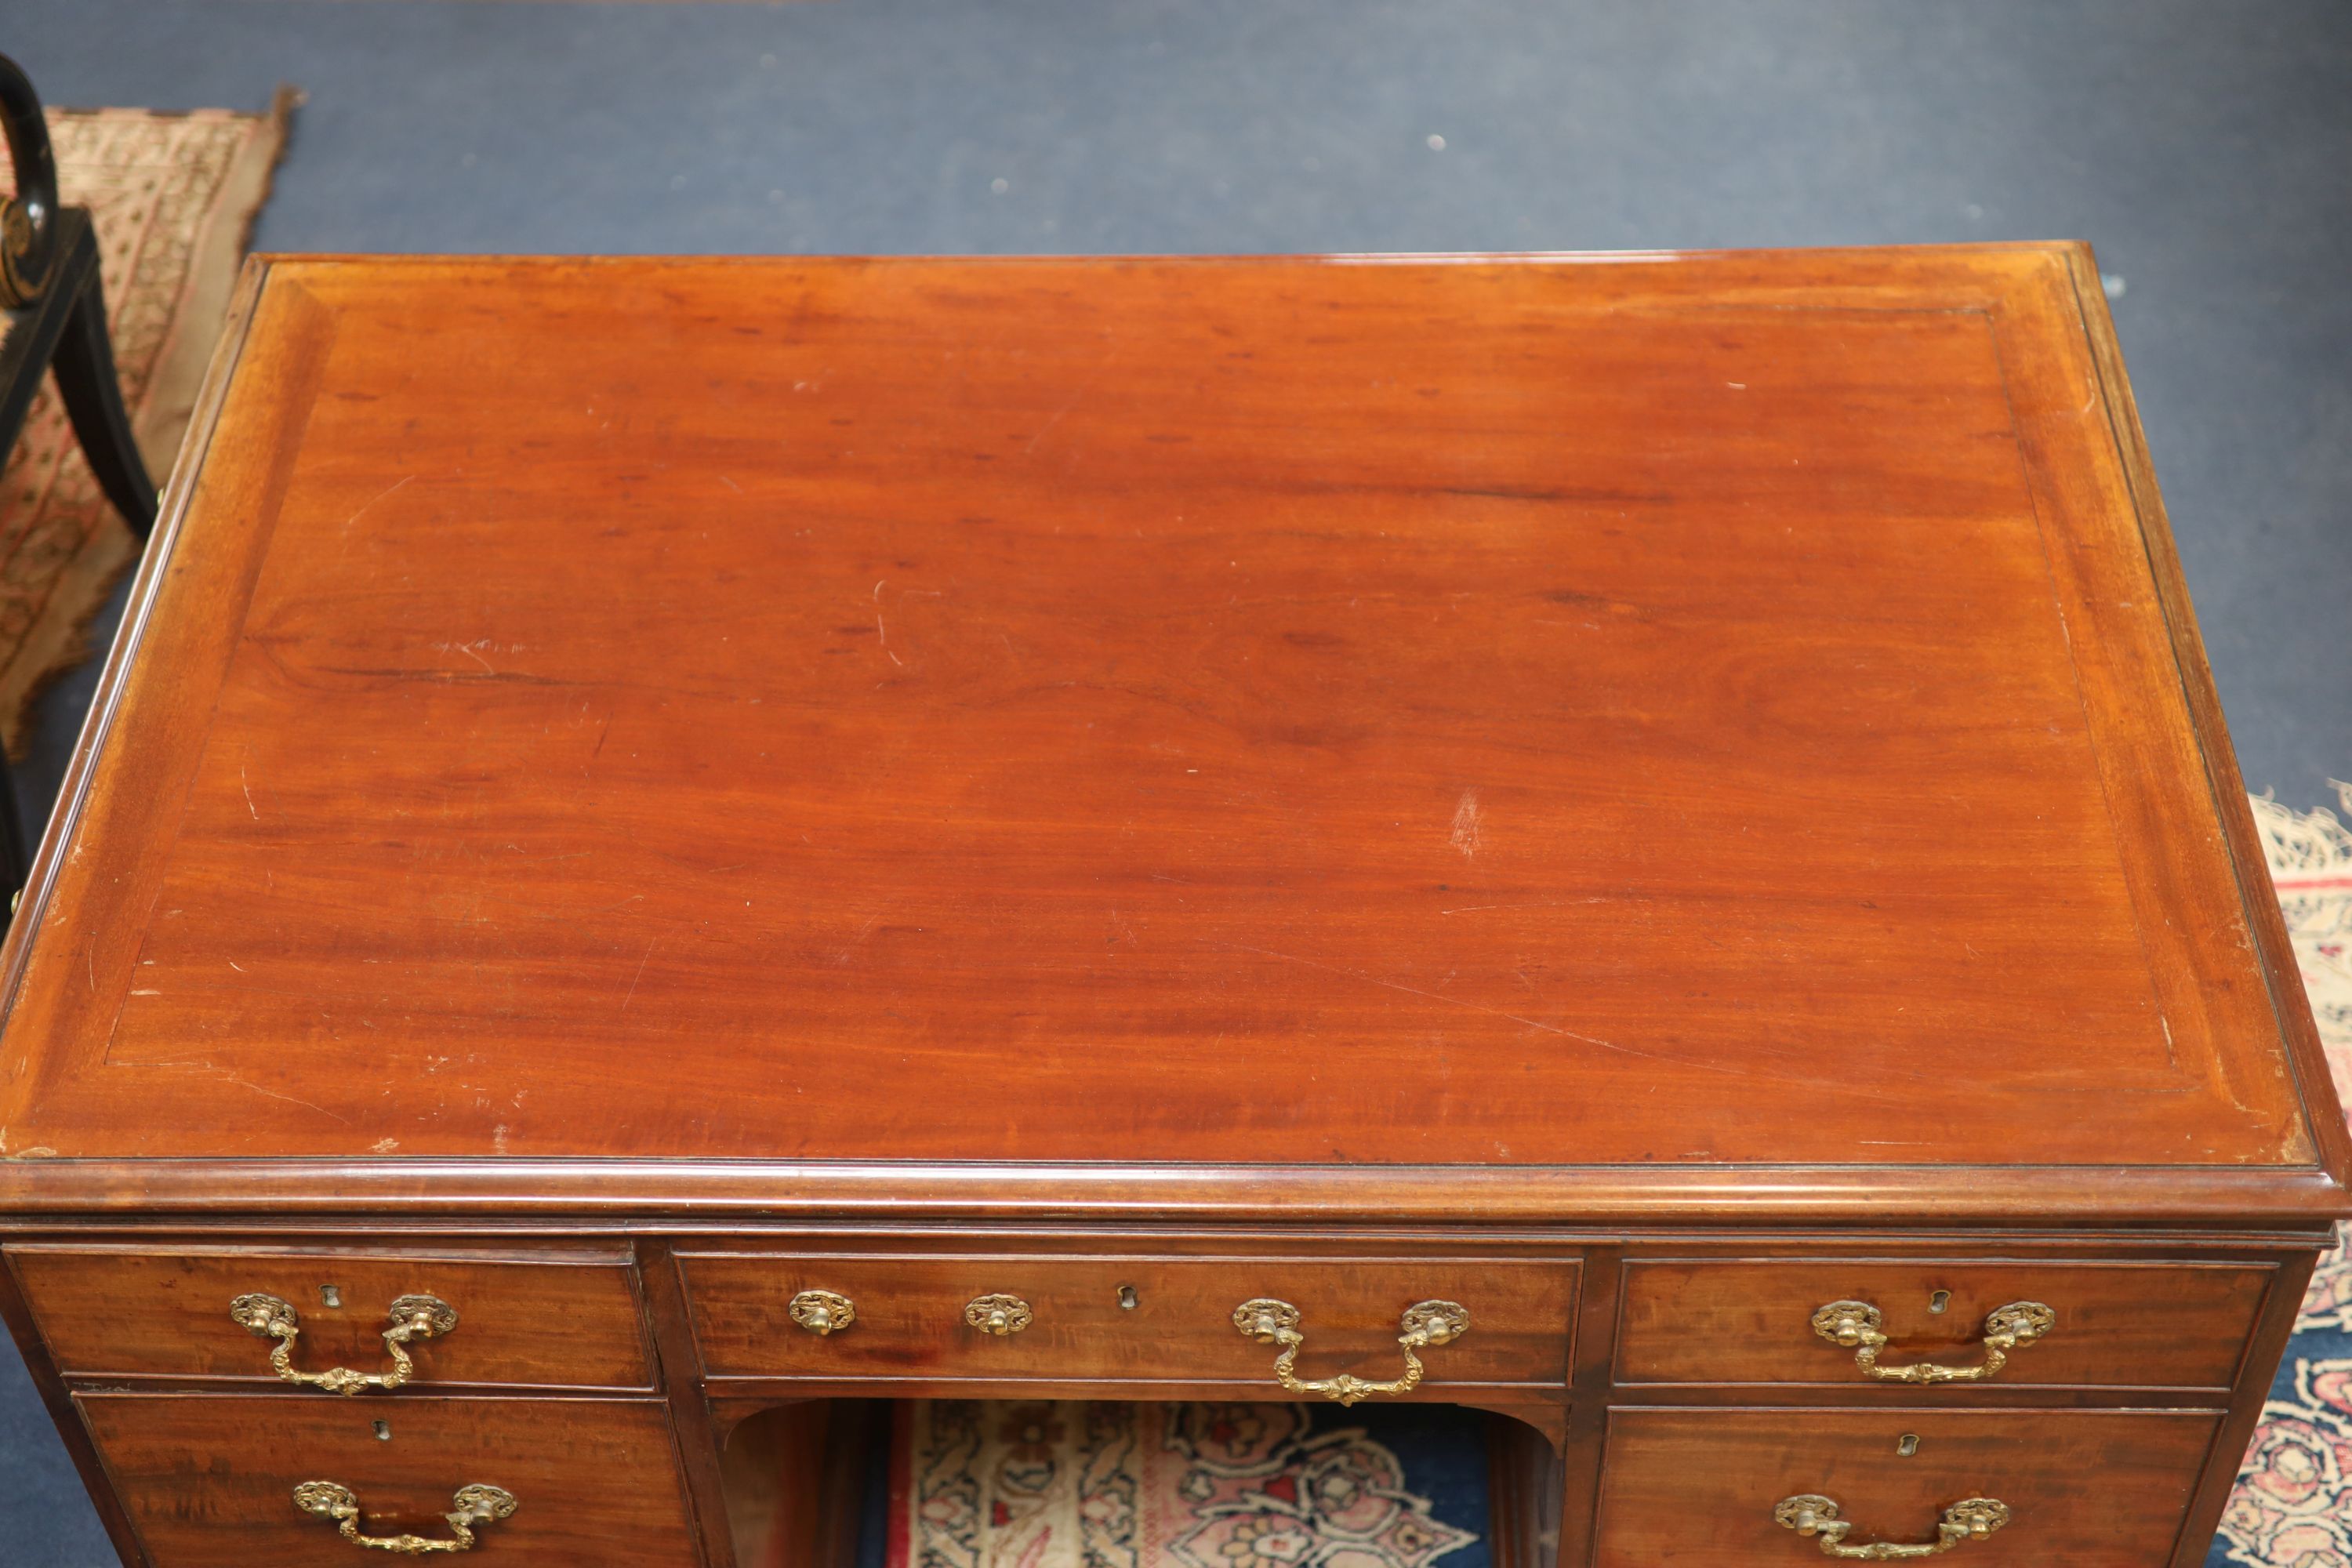 A George IV mahogany kneehole desk by William Williamson & Son of Guildford, second quarter 19th century width 125cm depth 79cm height